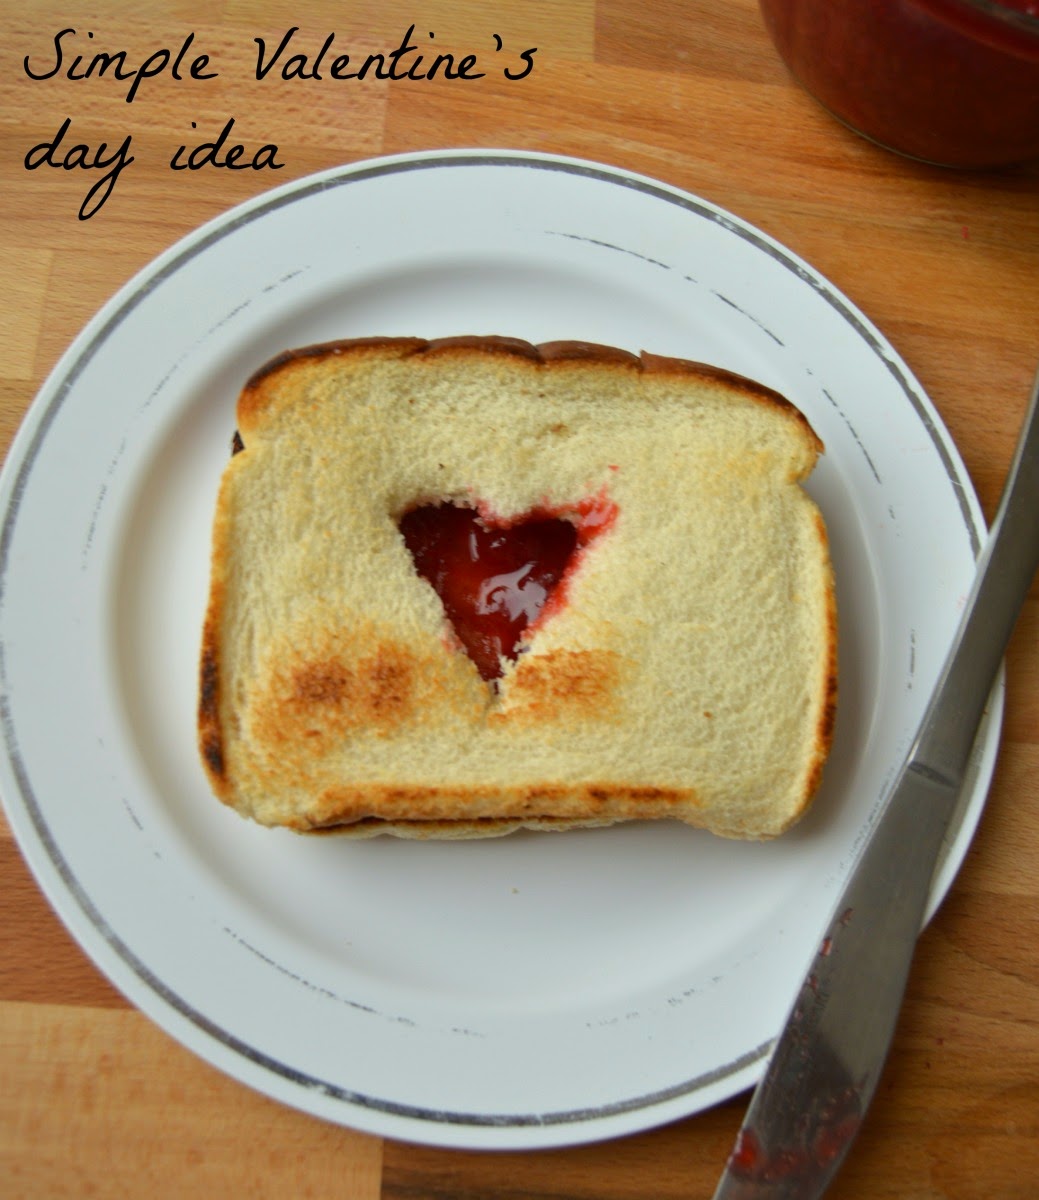 Strawberry Jam served with bread